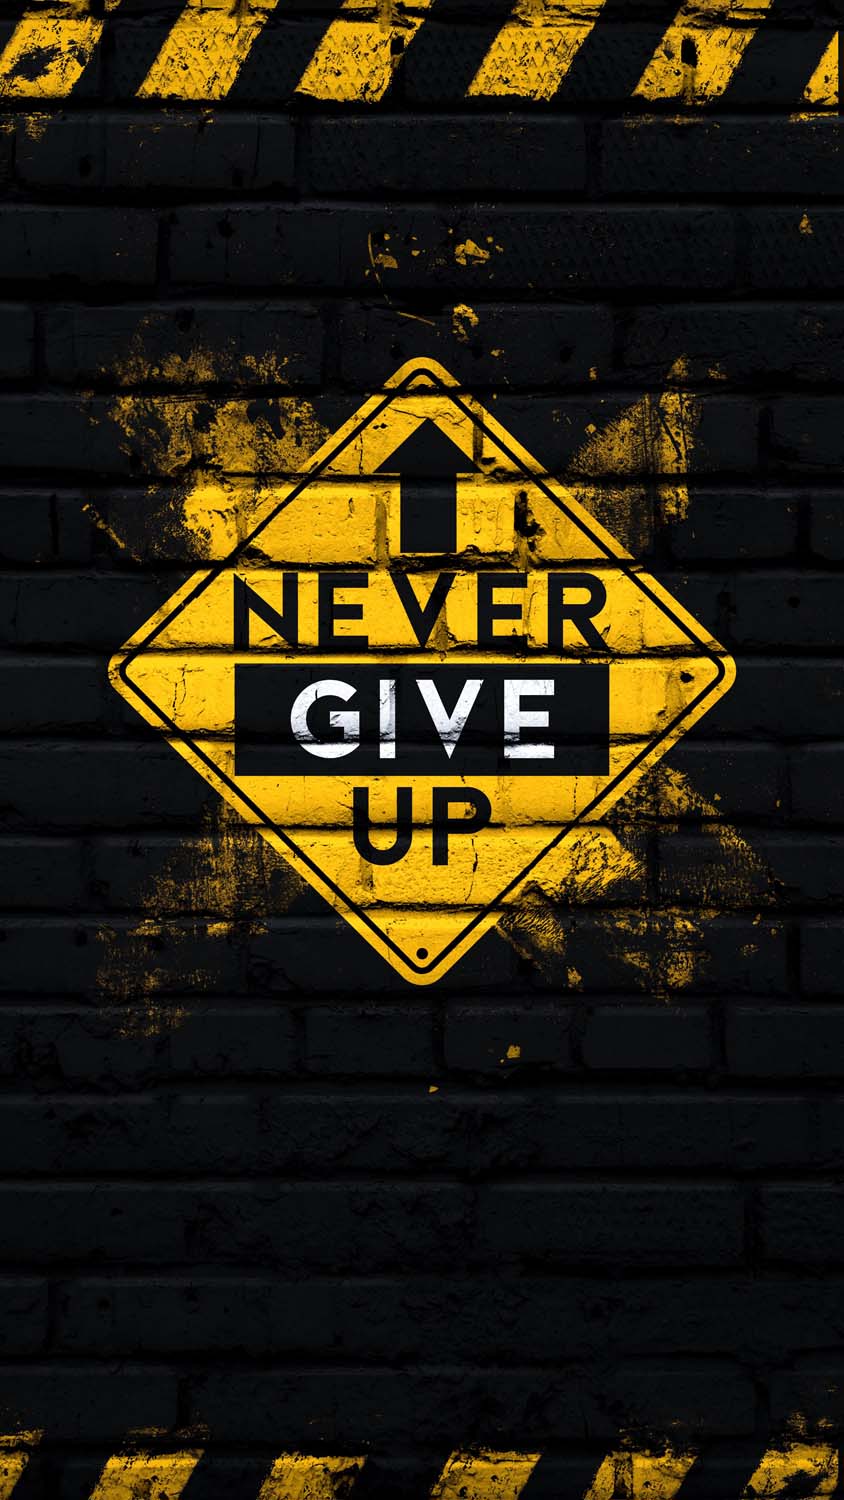 Never Give Up IPhone Wallpaper HD - IPhone Wallpapers : iPhone Wallpapers